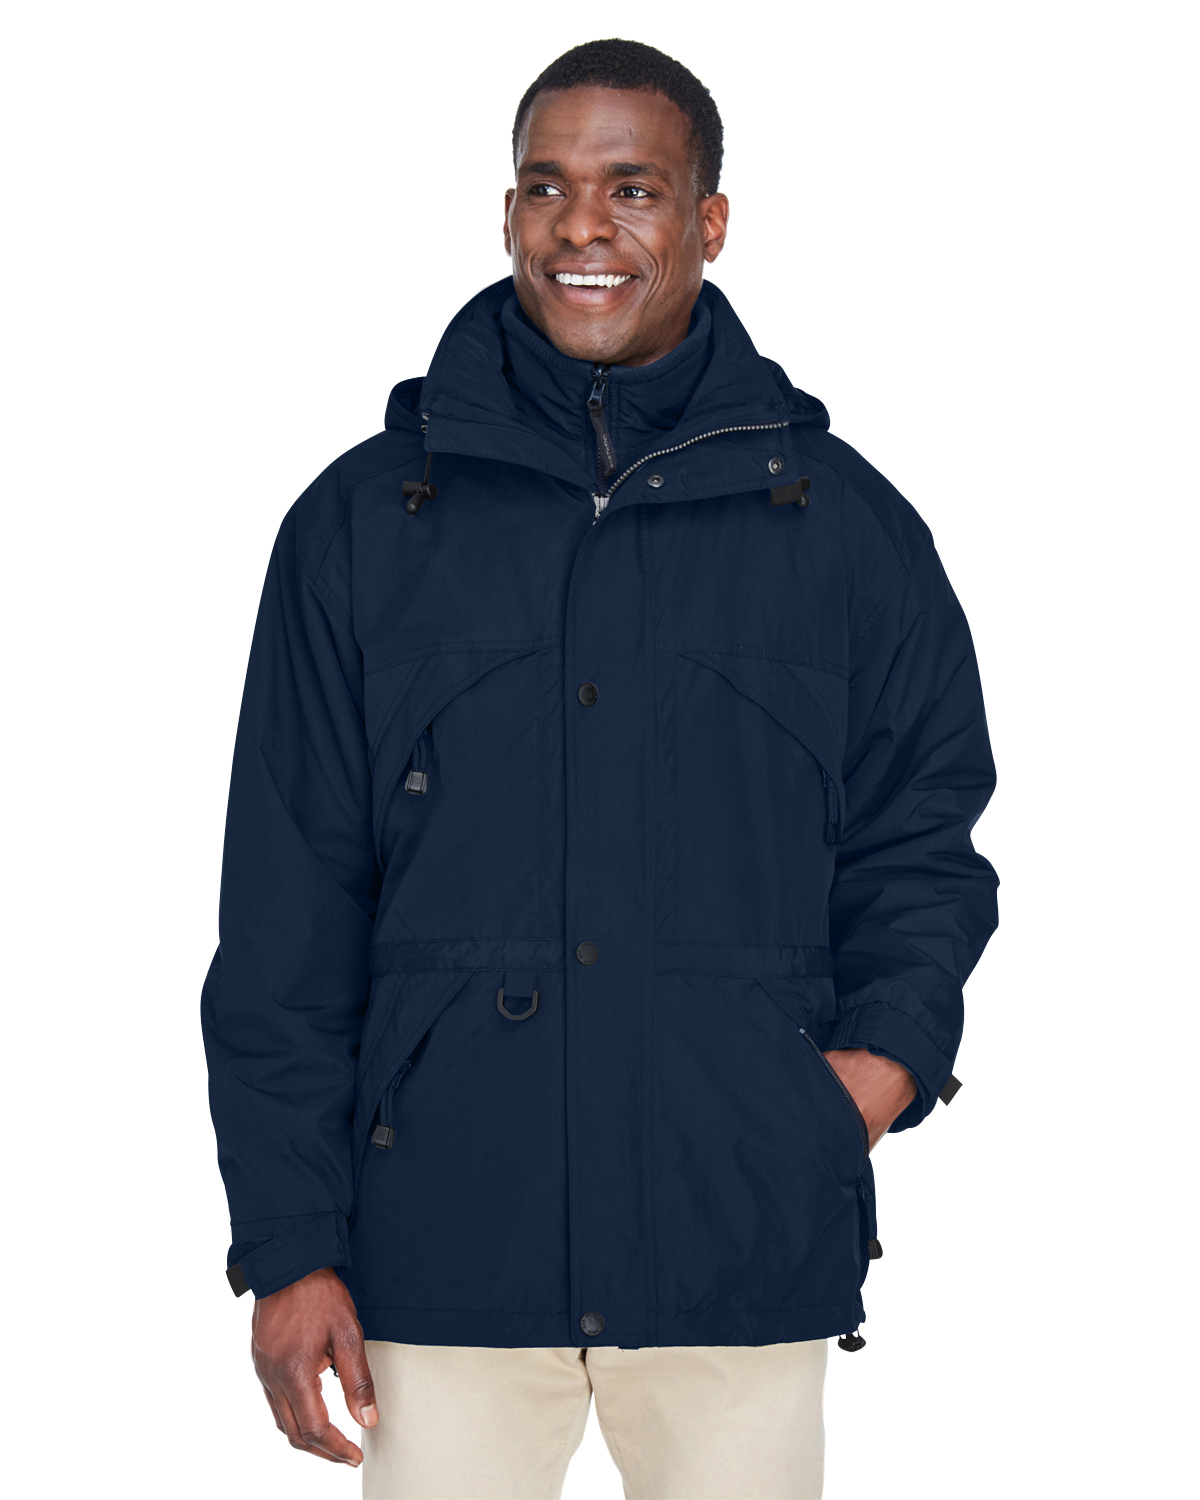 88007 Ash City - North End Adult 3-in-1 Parka with Dobby Trim